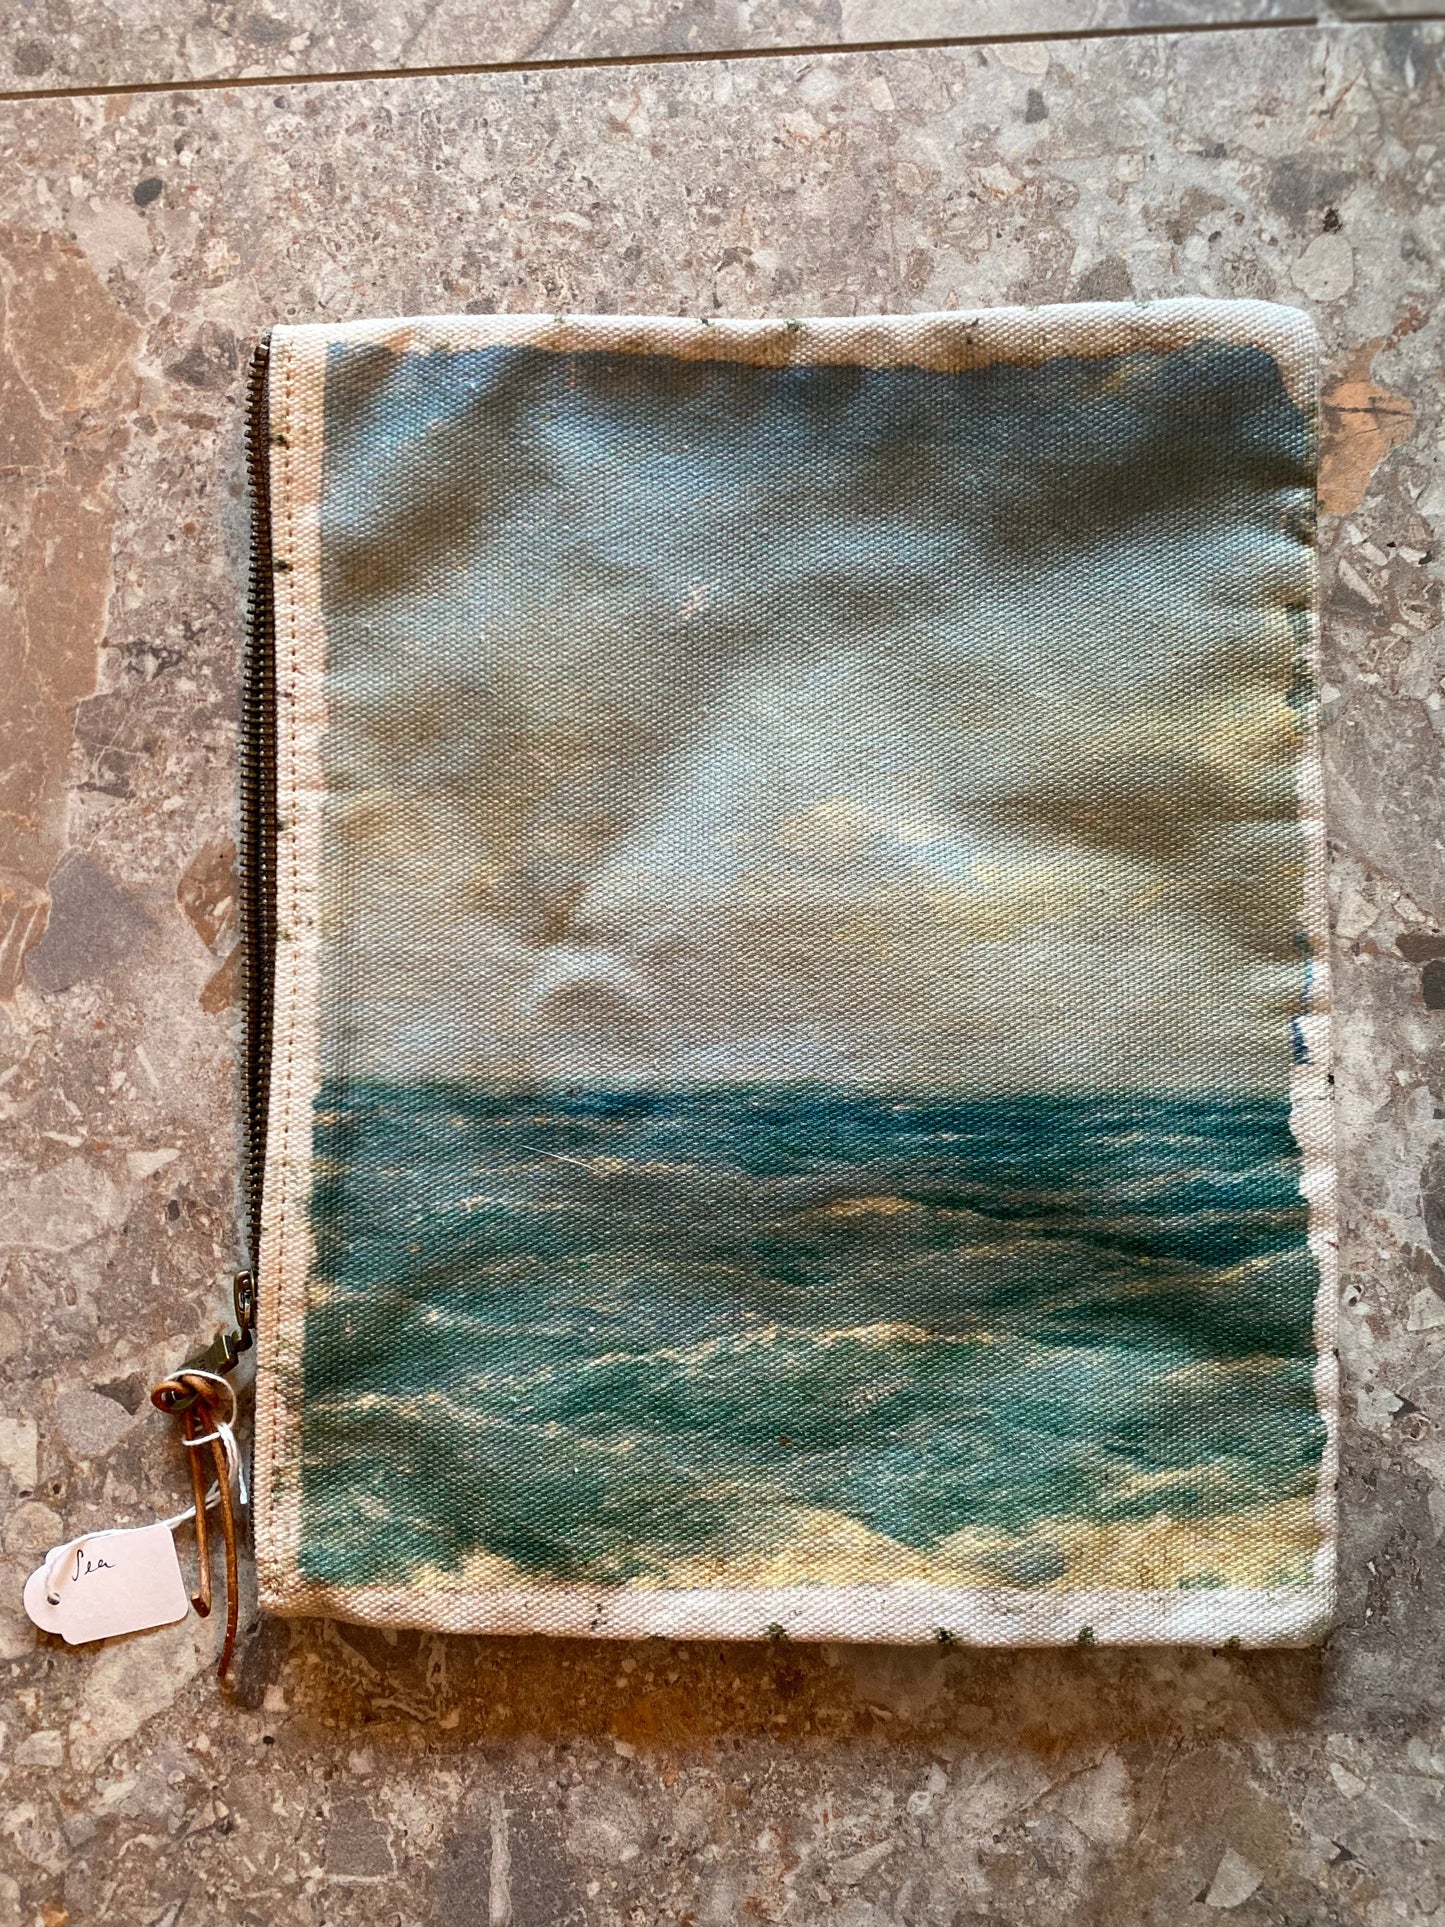 NEW! Swarm Canvas Painting Clutch - Sea